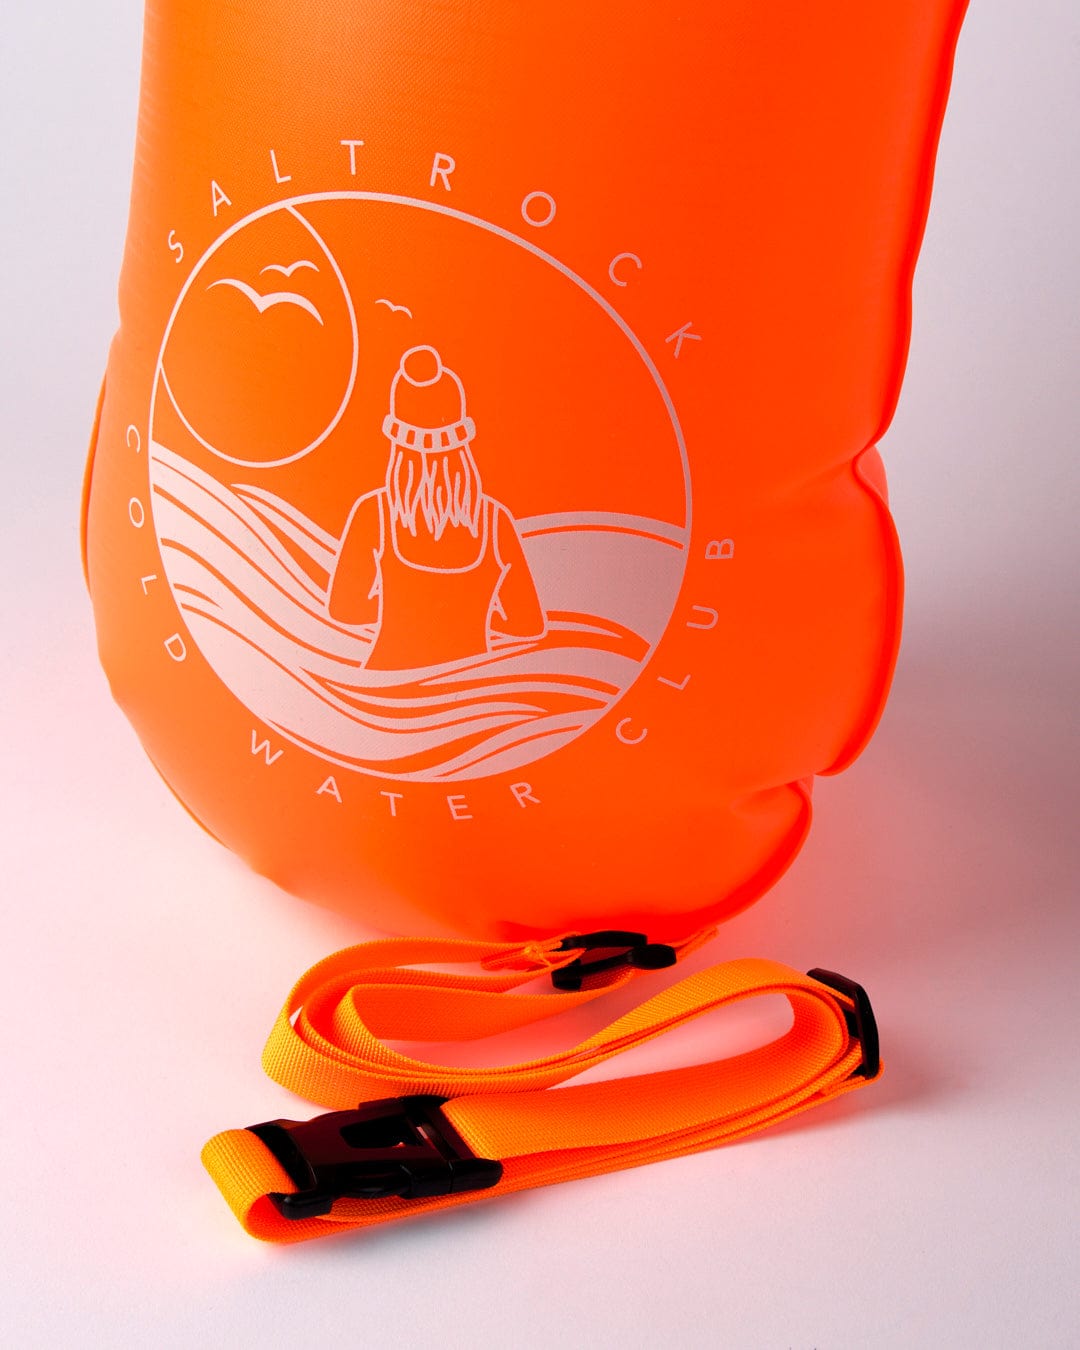 Bright orange waterproof Wild dry bag with Saltrock logo on white background, perfect for cold water swimming.